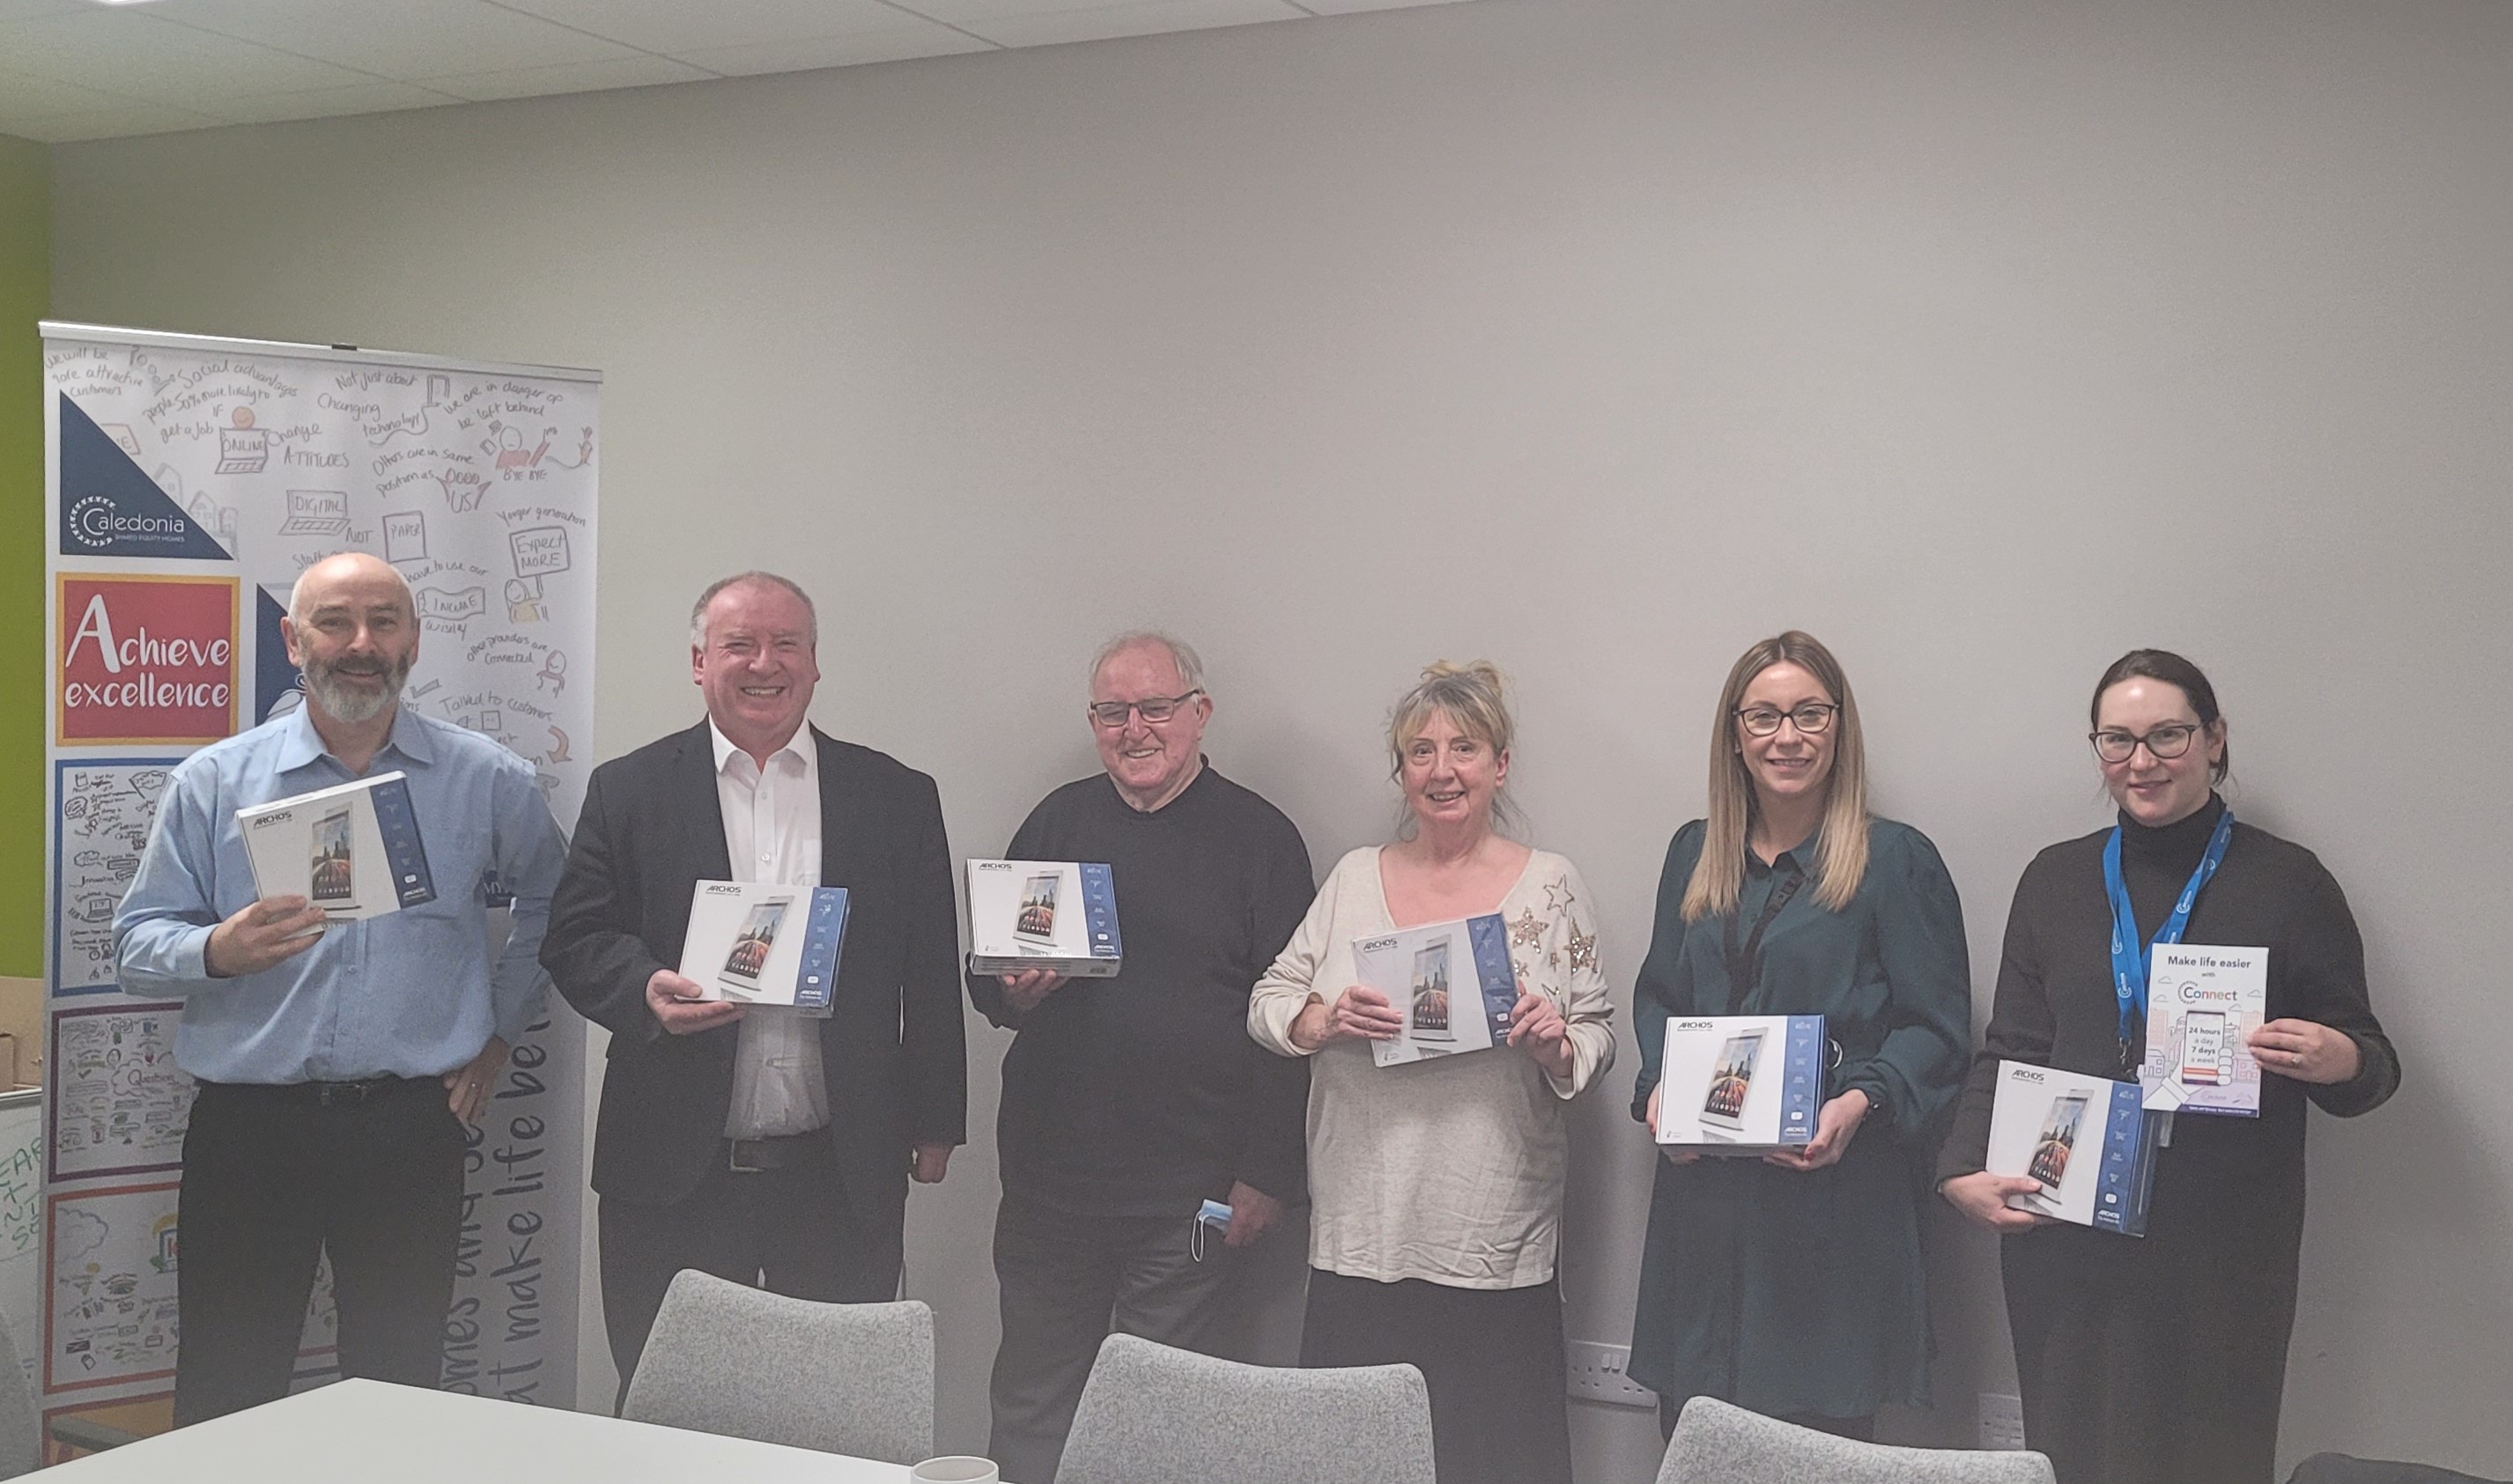 Caledonia helps Bellsmyre residents make digital connections